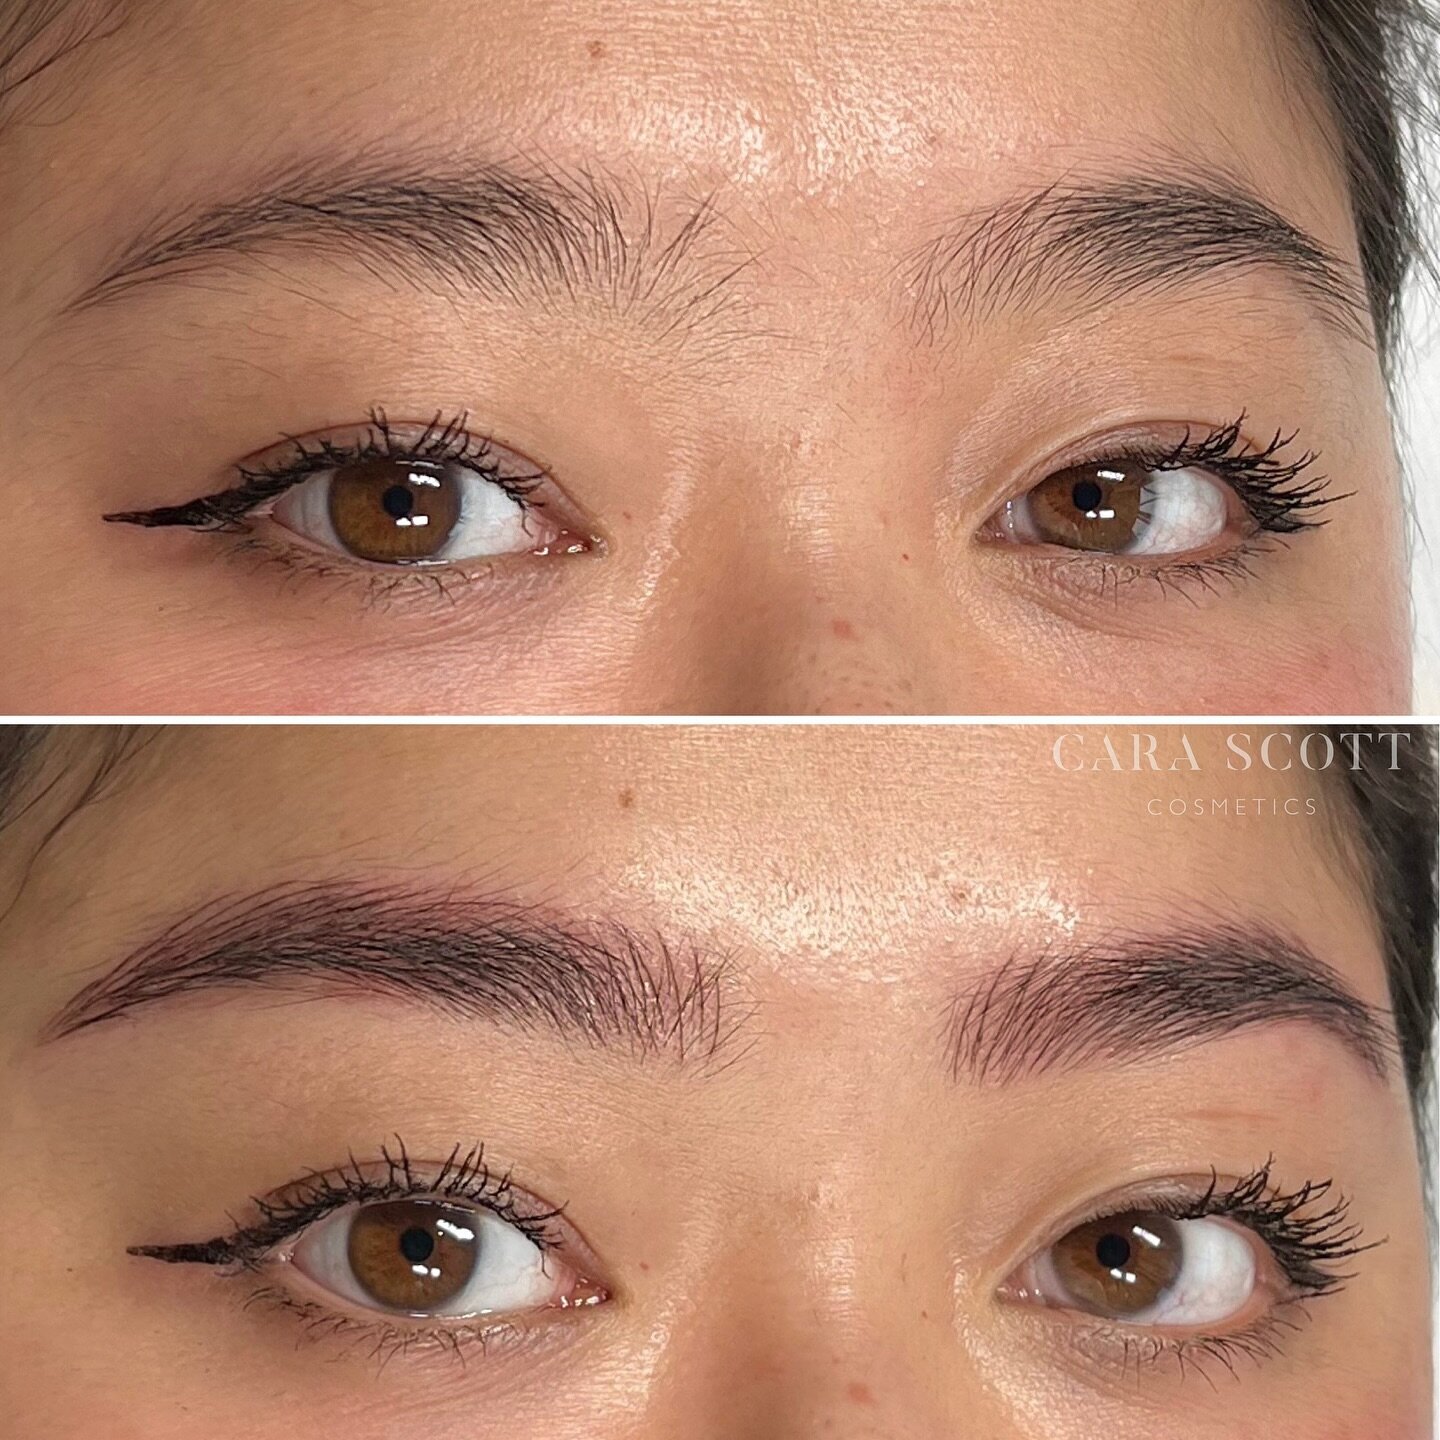 Always following the natural hair flow to create fuller and more defined brows with Micoblading 🤍